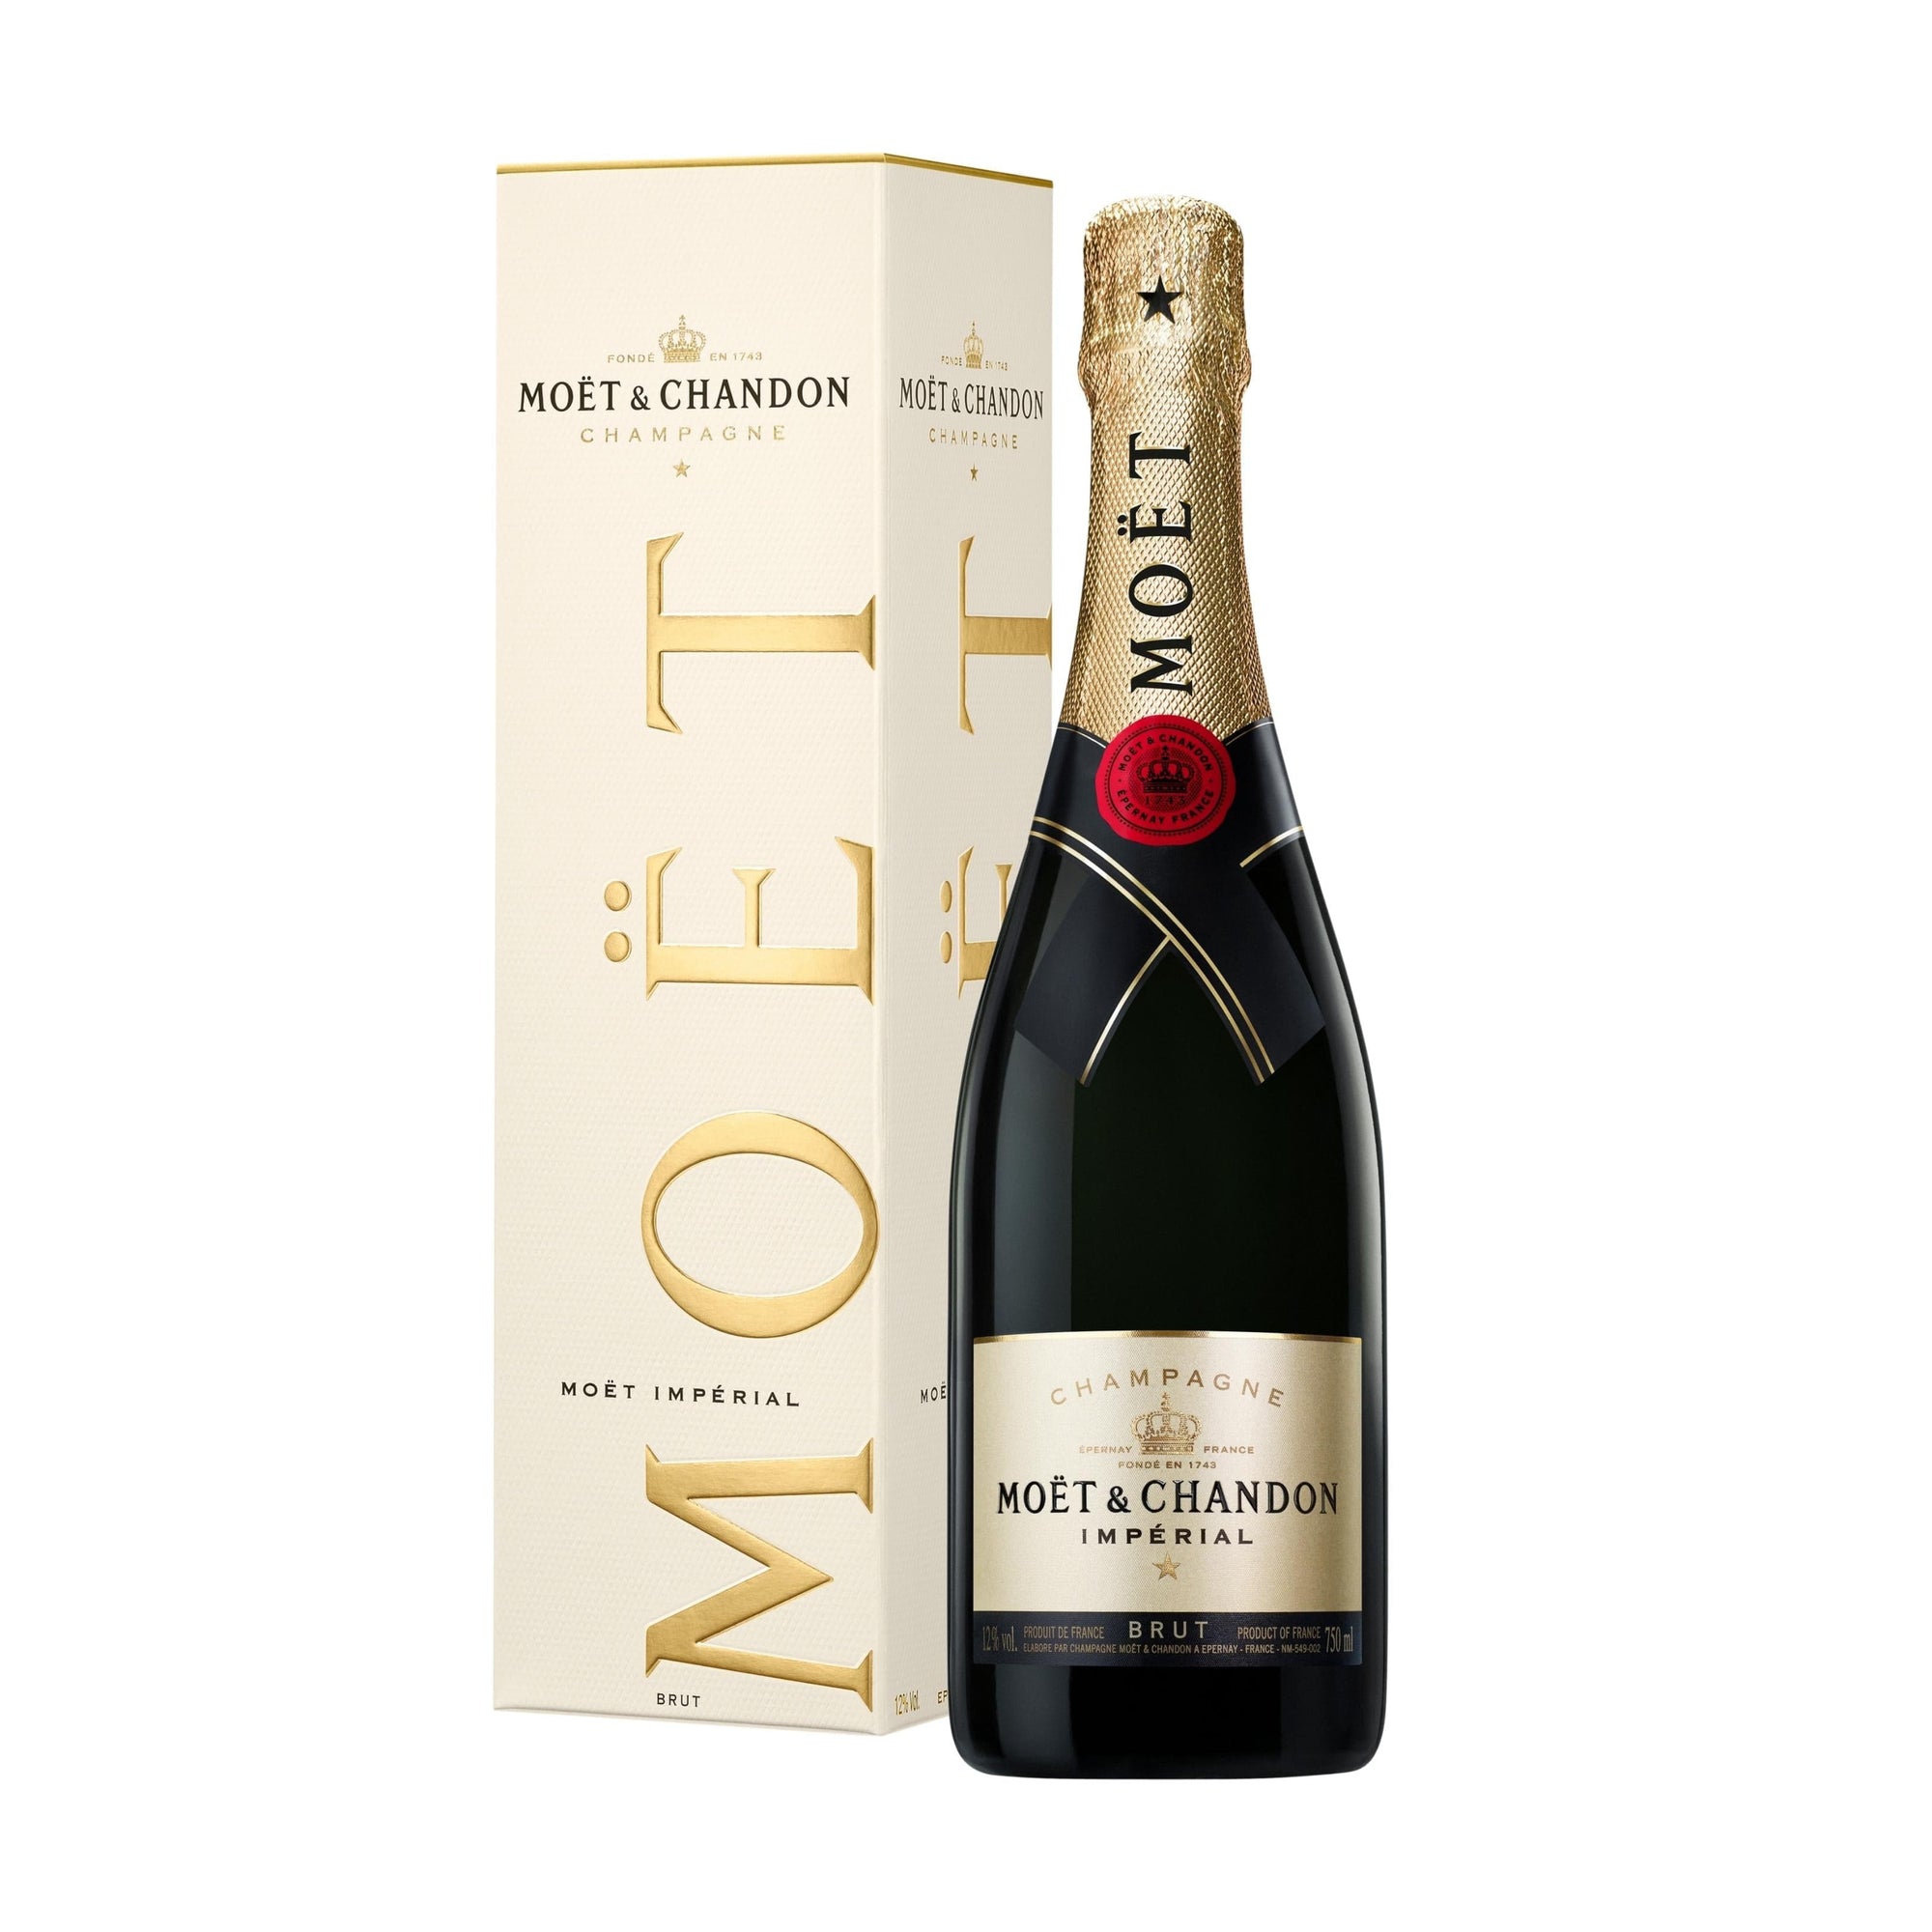 Personalised Moet & Chandon Brut Imperial Champagne NV 750ml - Gift Boxed